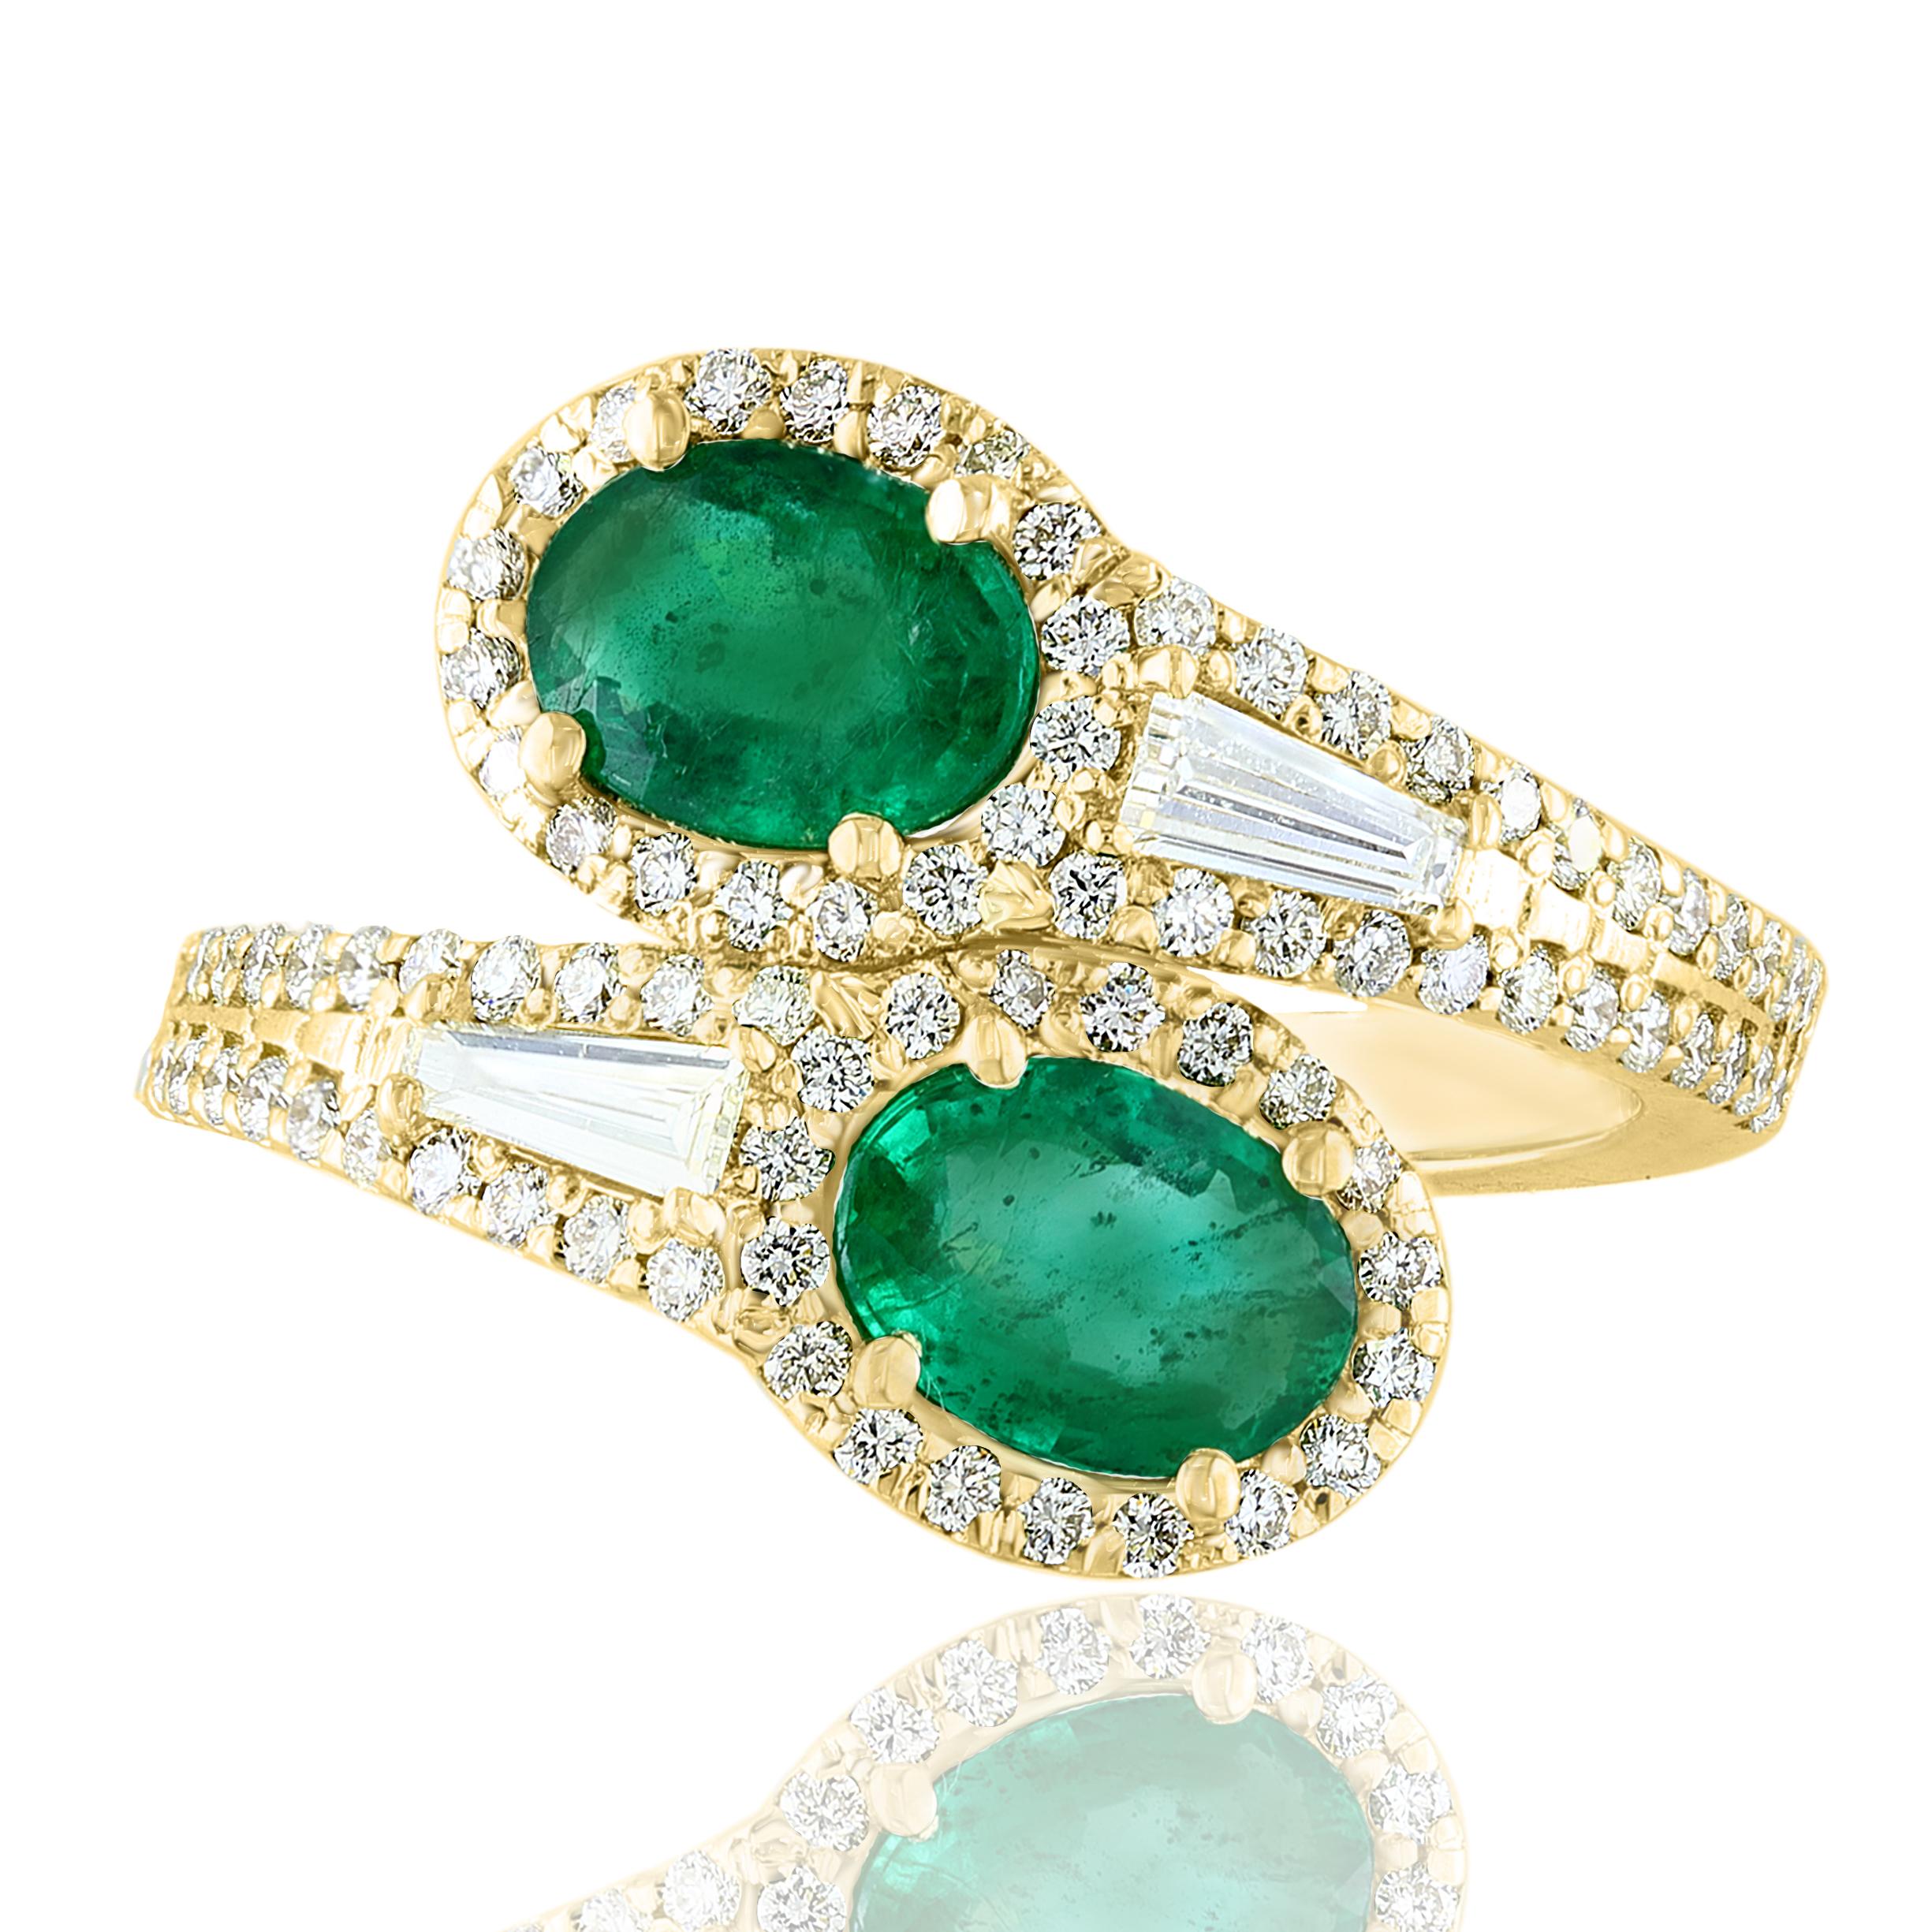 The stunning forever-together Toi et Moi ring features 2 Oval cut Emeralds embraced by east to west 2 baguette diamonds weigh and 84 round diamonds halfway to the shank. Handcrafted in 14k Yellow Gold.
2 oval Emeralds in the center weigh 1.52 carats